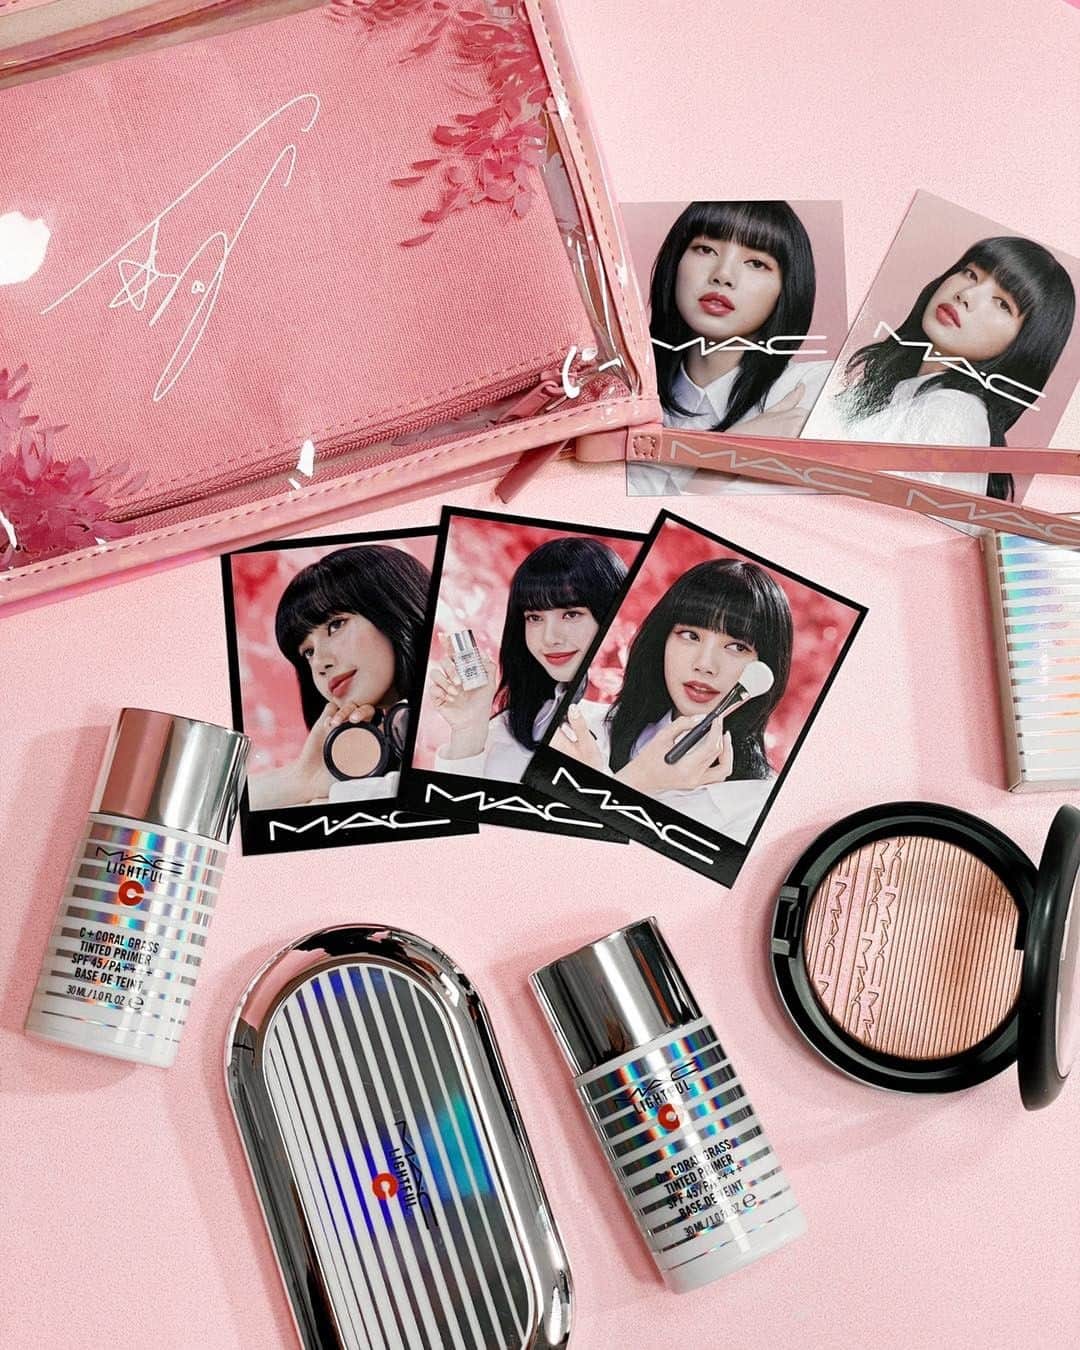 M·A·C Cosmetics Hong Kongさんのインスタグラム写真 - (M·A·C Cosmetics Hong KongInstagram)「LISA 限量精品等緊你! 我哋又有好消息話俾各位Lilies聽！由即日起嚟M·A·C門市選購明星最愛彩妝，即刻可以獲得LISA簽名珍藏卡及化妝袋！ 💖凡購買任何LISA美妝系列滿$160*，即送你隨機一款限量代言收藏卡！ 💖凡購物滿$420*，即送限量寶麗來收藏卡套裝 💖凡購物滿$780*，即送限量簽名透明化妝袋 立即mark定以上購物攻略，同閨蜜一齊來M·A·C儲齊一套啦！  *禮品數量有限，送完即止。如有任何爭議，M·A·C Cosmetics Hong Kong保留最終決定權。 #MACLOVESLISA #MACHongKong  Calling out all @lalalalisa_m lovers, we have a special treat for you!  Starting today, you can receive LISA's limited edition gifts upon purchasing her favourite makeup products at offline stores! 💖 Buy any product of the LISA's Look upon $160 to enjoy one random Limited Edition Photocard Card* 💖 Shop for $420* to enjoy a set of three Limited Edition Polaroid Cards* 💖 Top up your purchase to a minimum spending of $780* to receive a Limited Edition Makeup Pouch  *Customer must buy at least 1 product from Lisa’s Look in order to enjoy the offer. Cards styles will be given randomly from one of Lisa’s campaign key visuals. While GWP stock last. In case of dispute, M·A·C Cosmetics Hong Kong reserves the right of final decision.」2月2日 10時00分 - maccosmeticshk